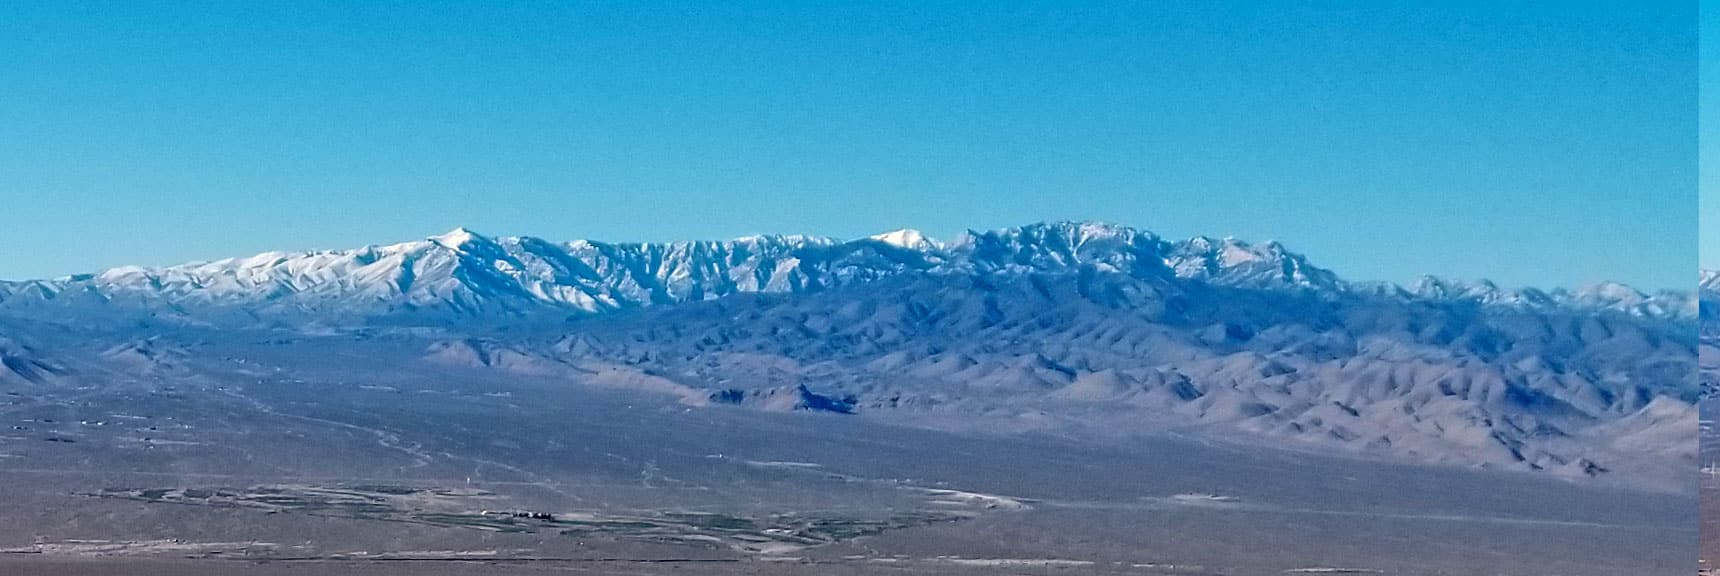 Mt Charleston Wilderness from SW Approach to Gass Peak About 4000ft